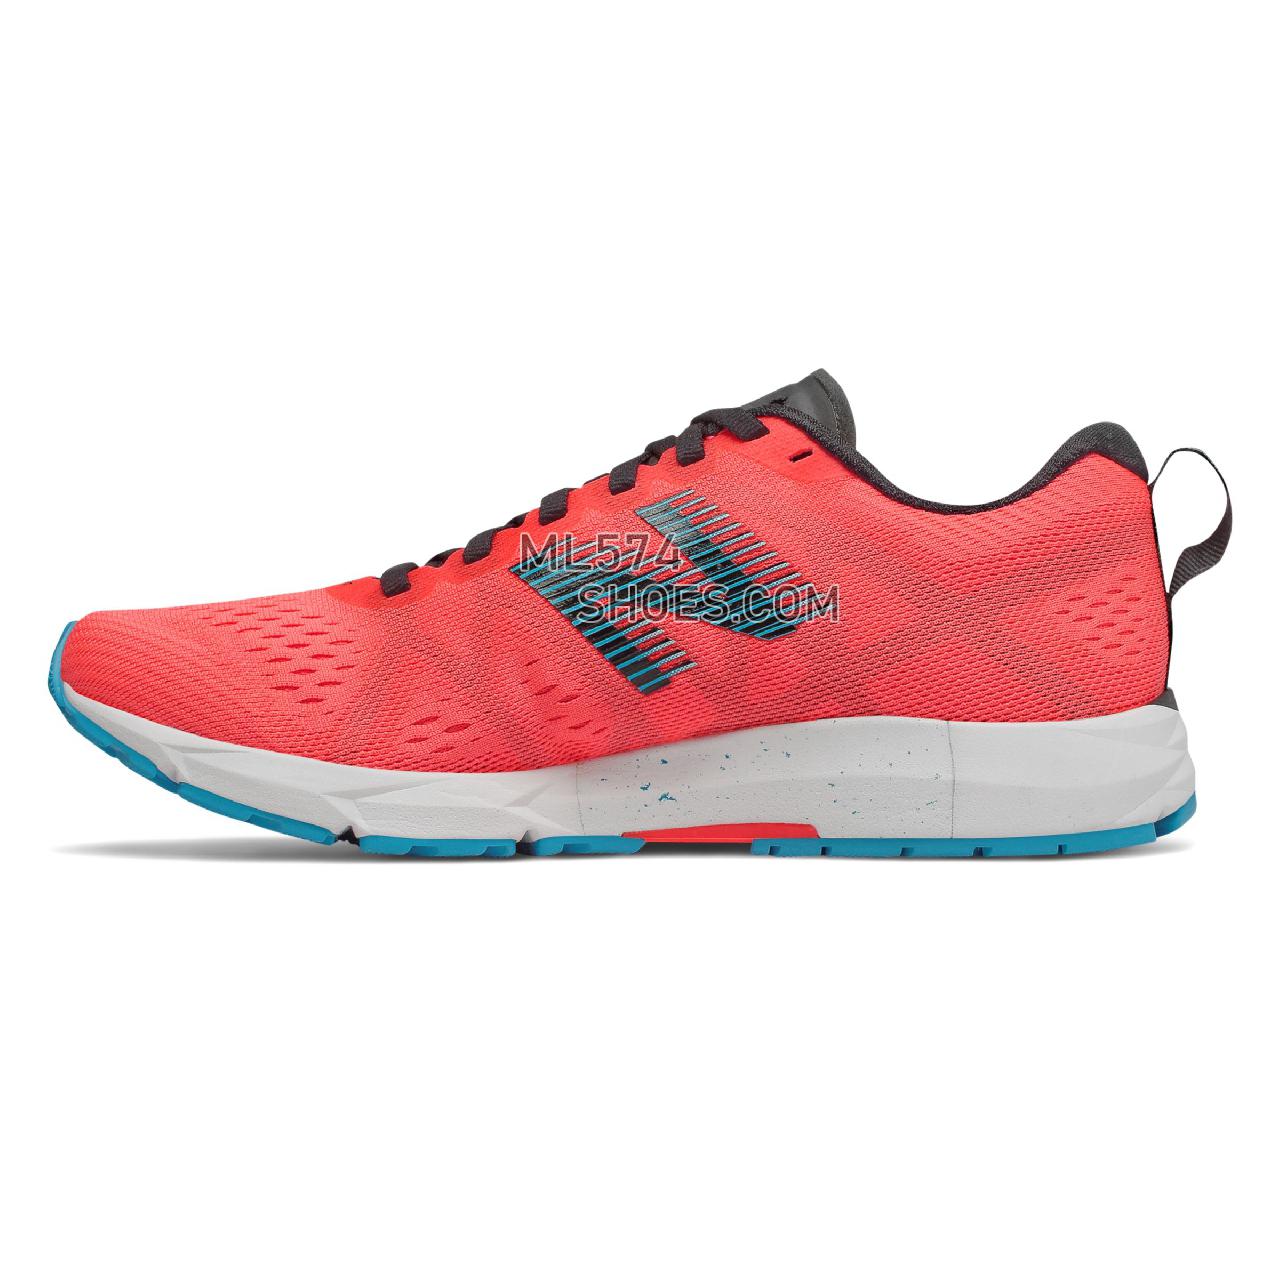 New Balance 1500v4 - Women's 1500 - Running Dragonfly with Black - W1500PP4